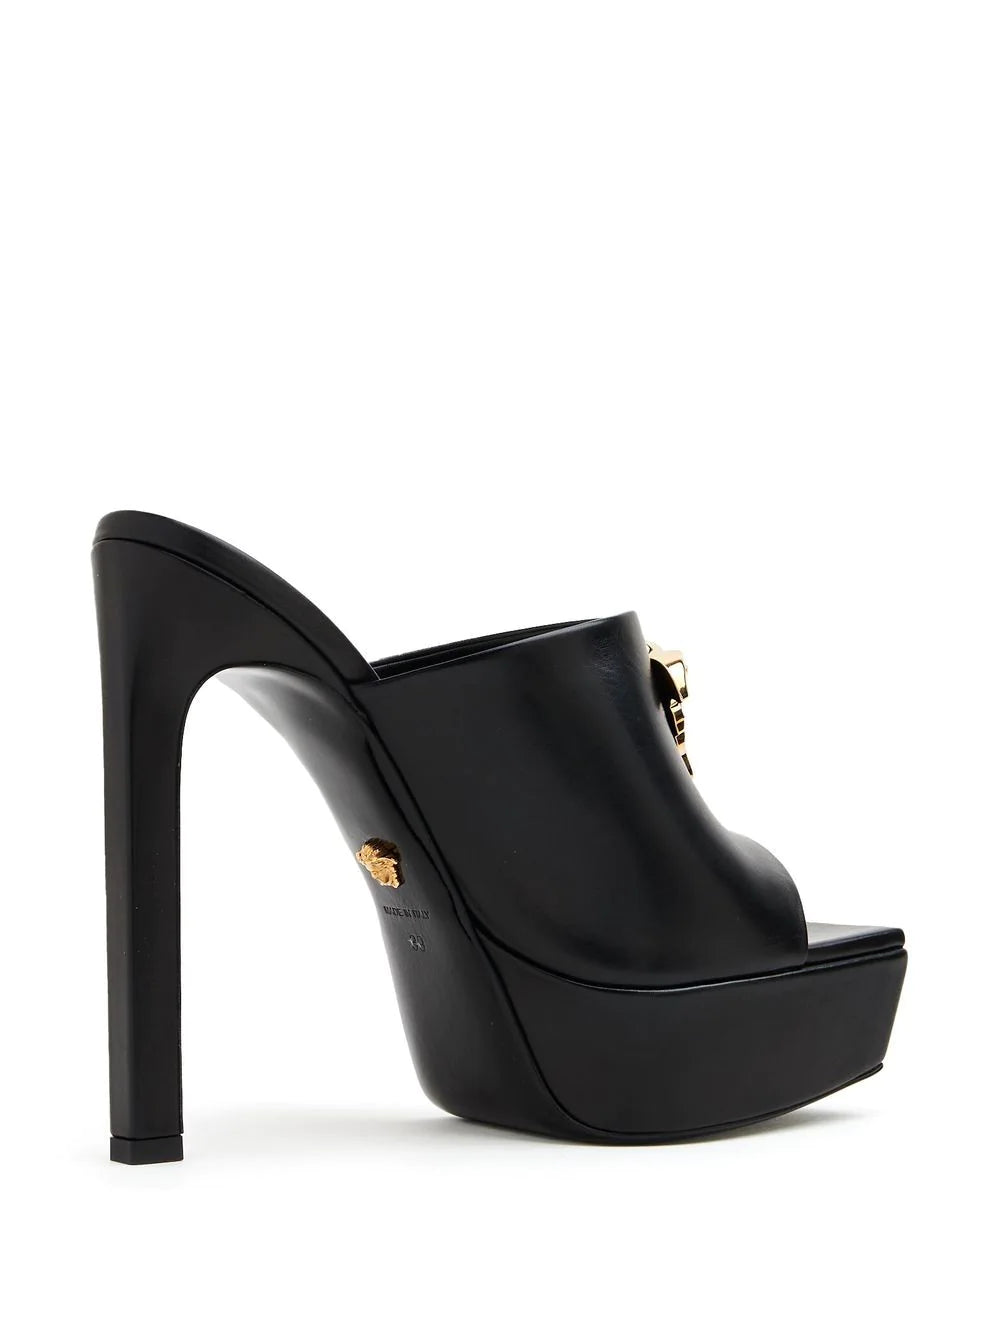 Medusa PVC and leather sandals in black - Versace